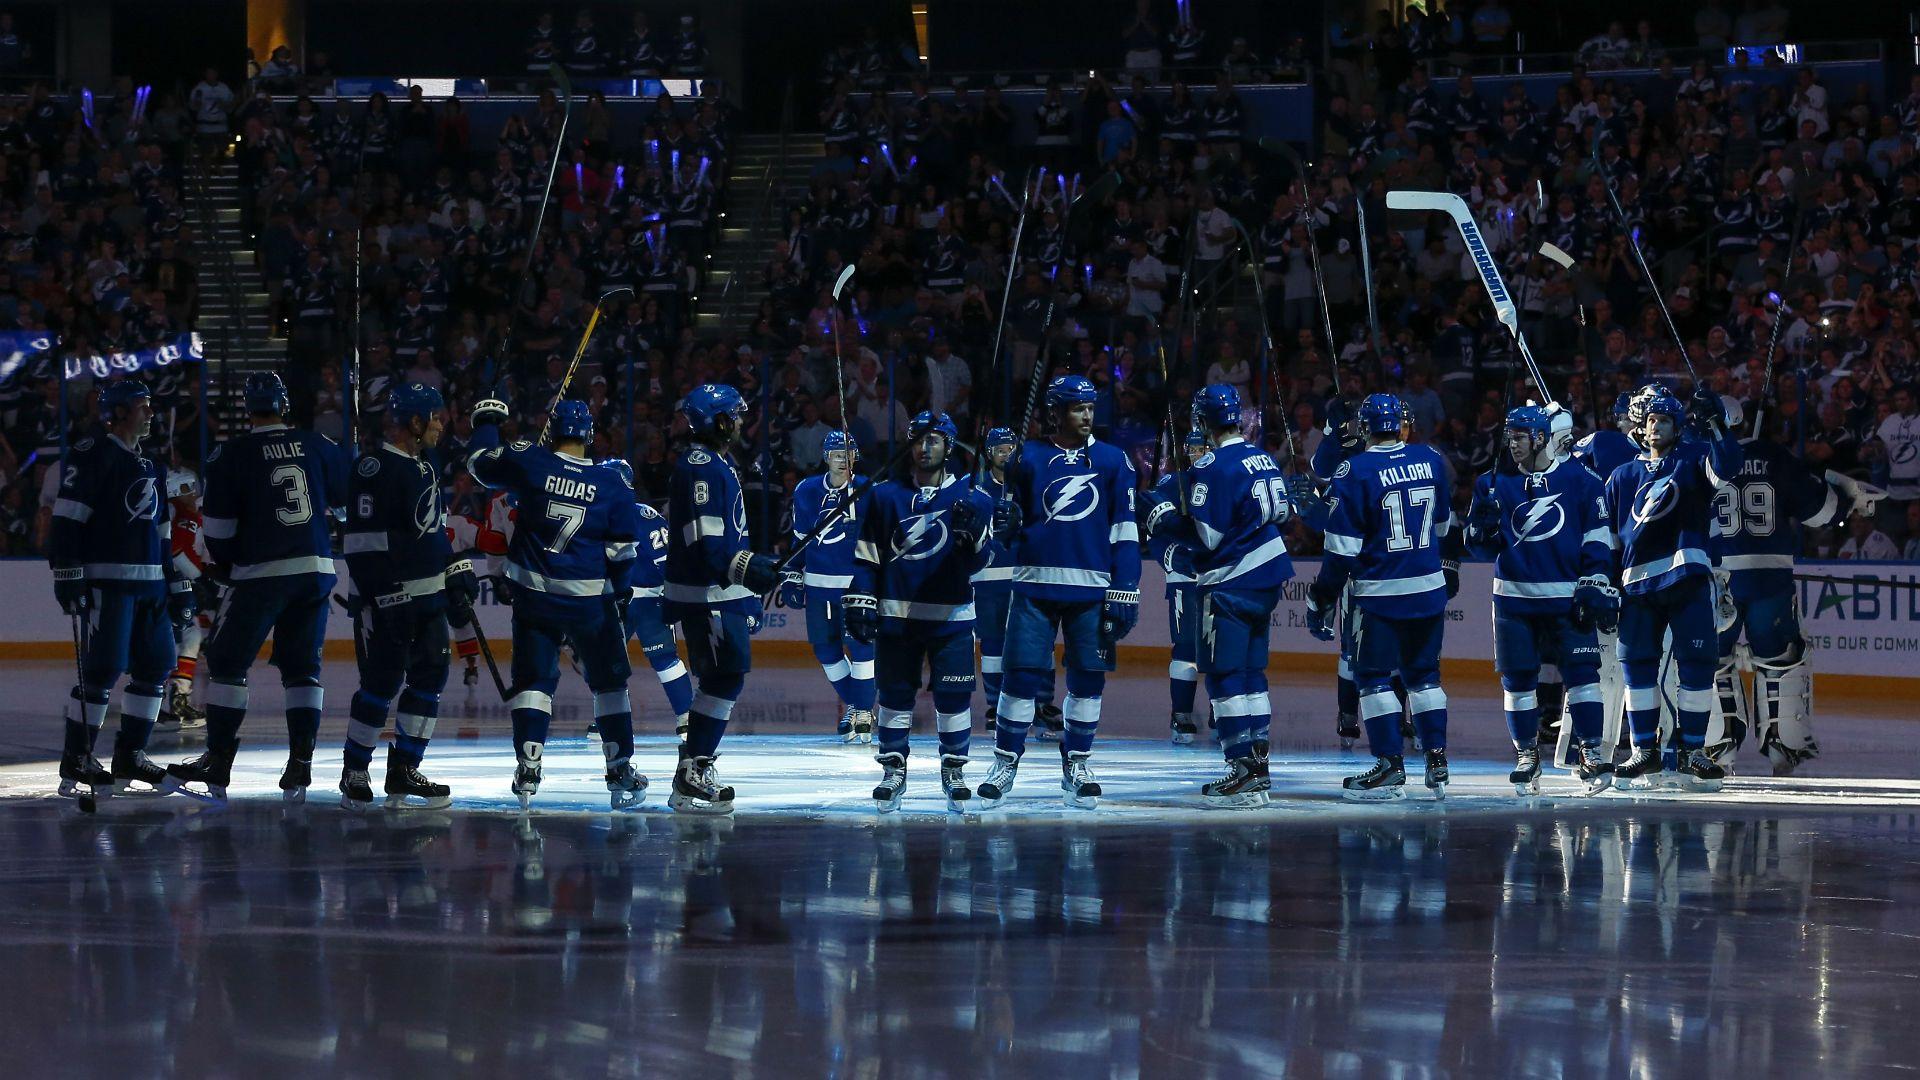 Restrictive ticket sales all part of Lightning's plan for 'playoff